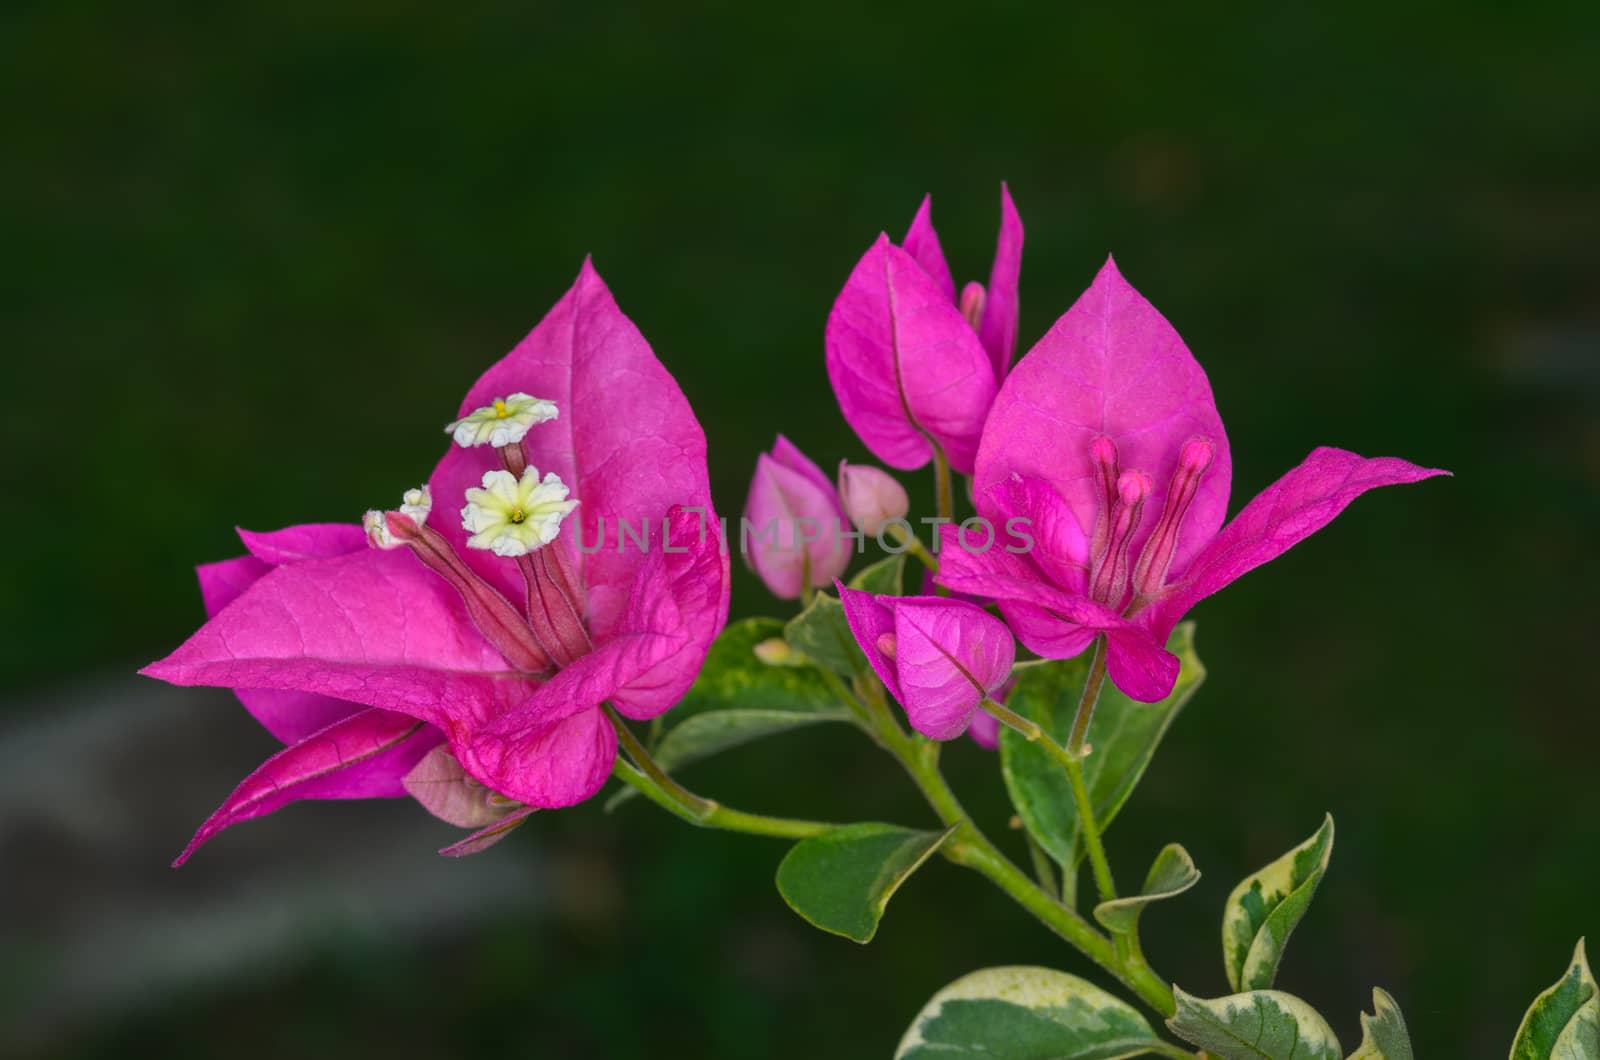 closeup of pink Bougainvillea flowers in the garden,
shot with natural light